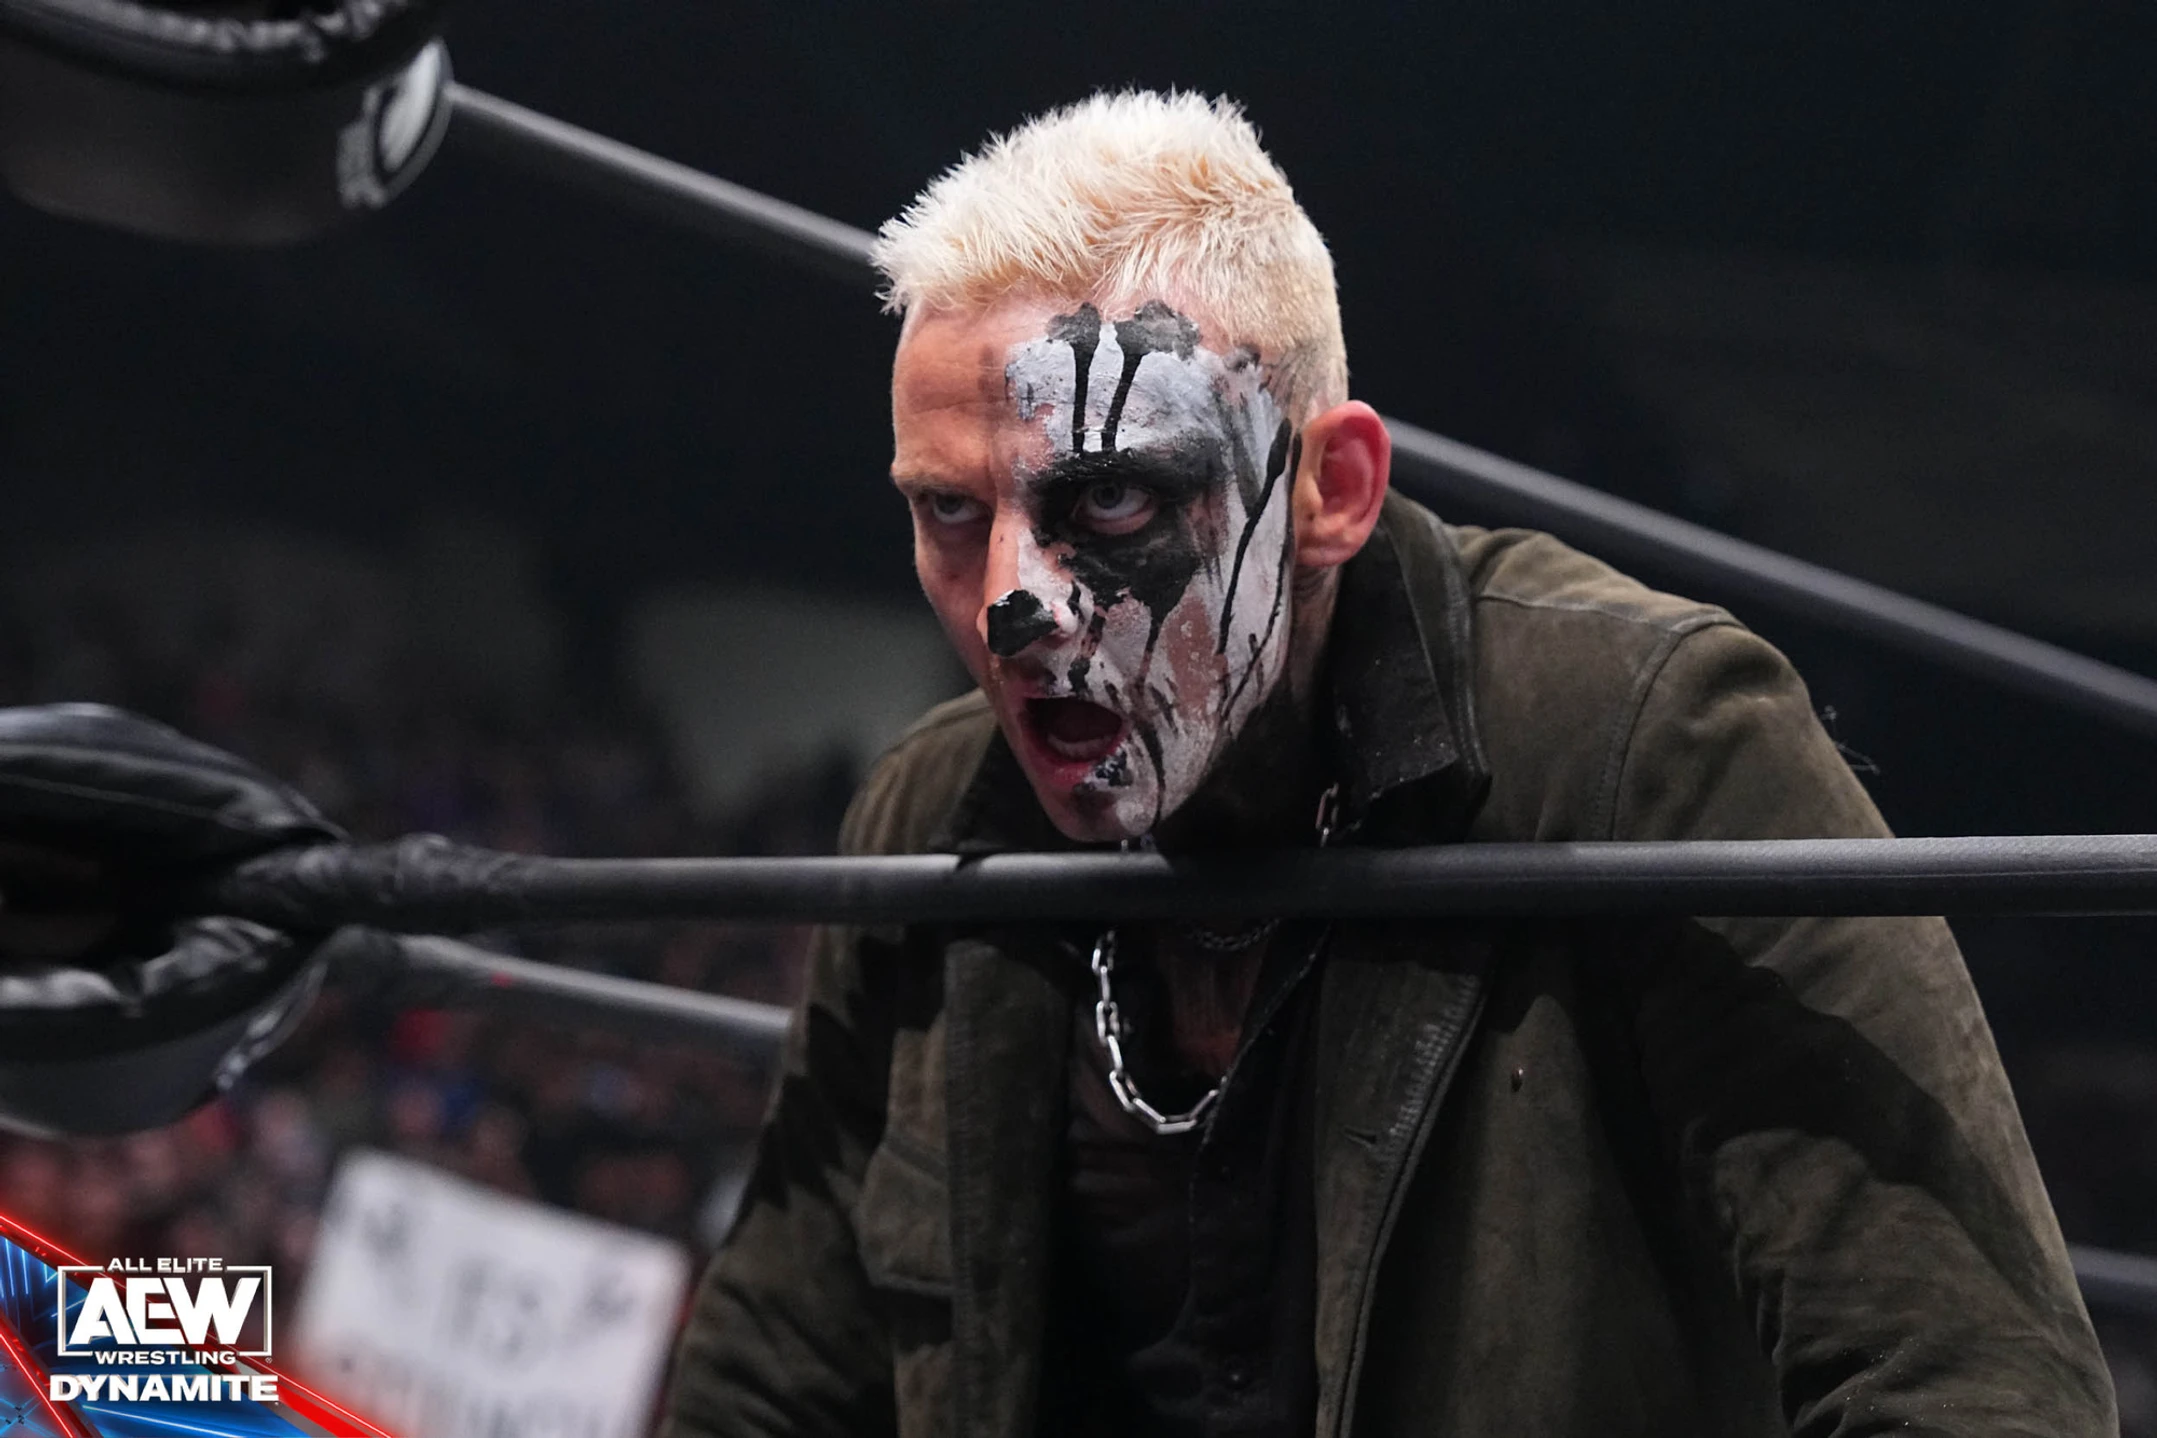 Darby Allin Suffers Severe Injury After Being Struck by Bus in New York City